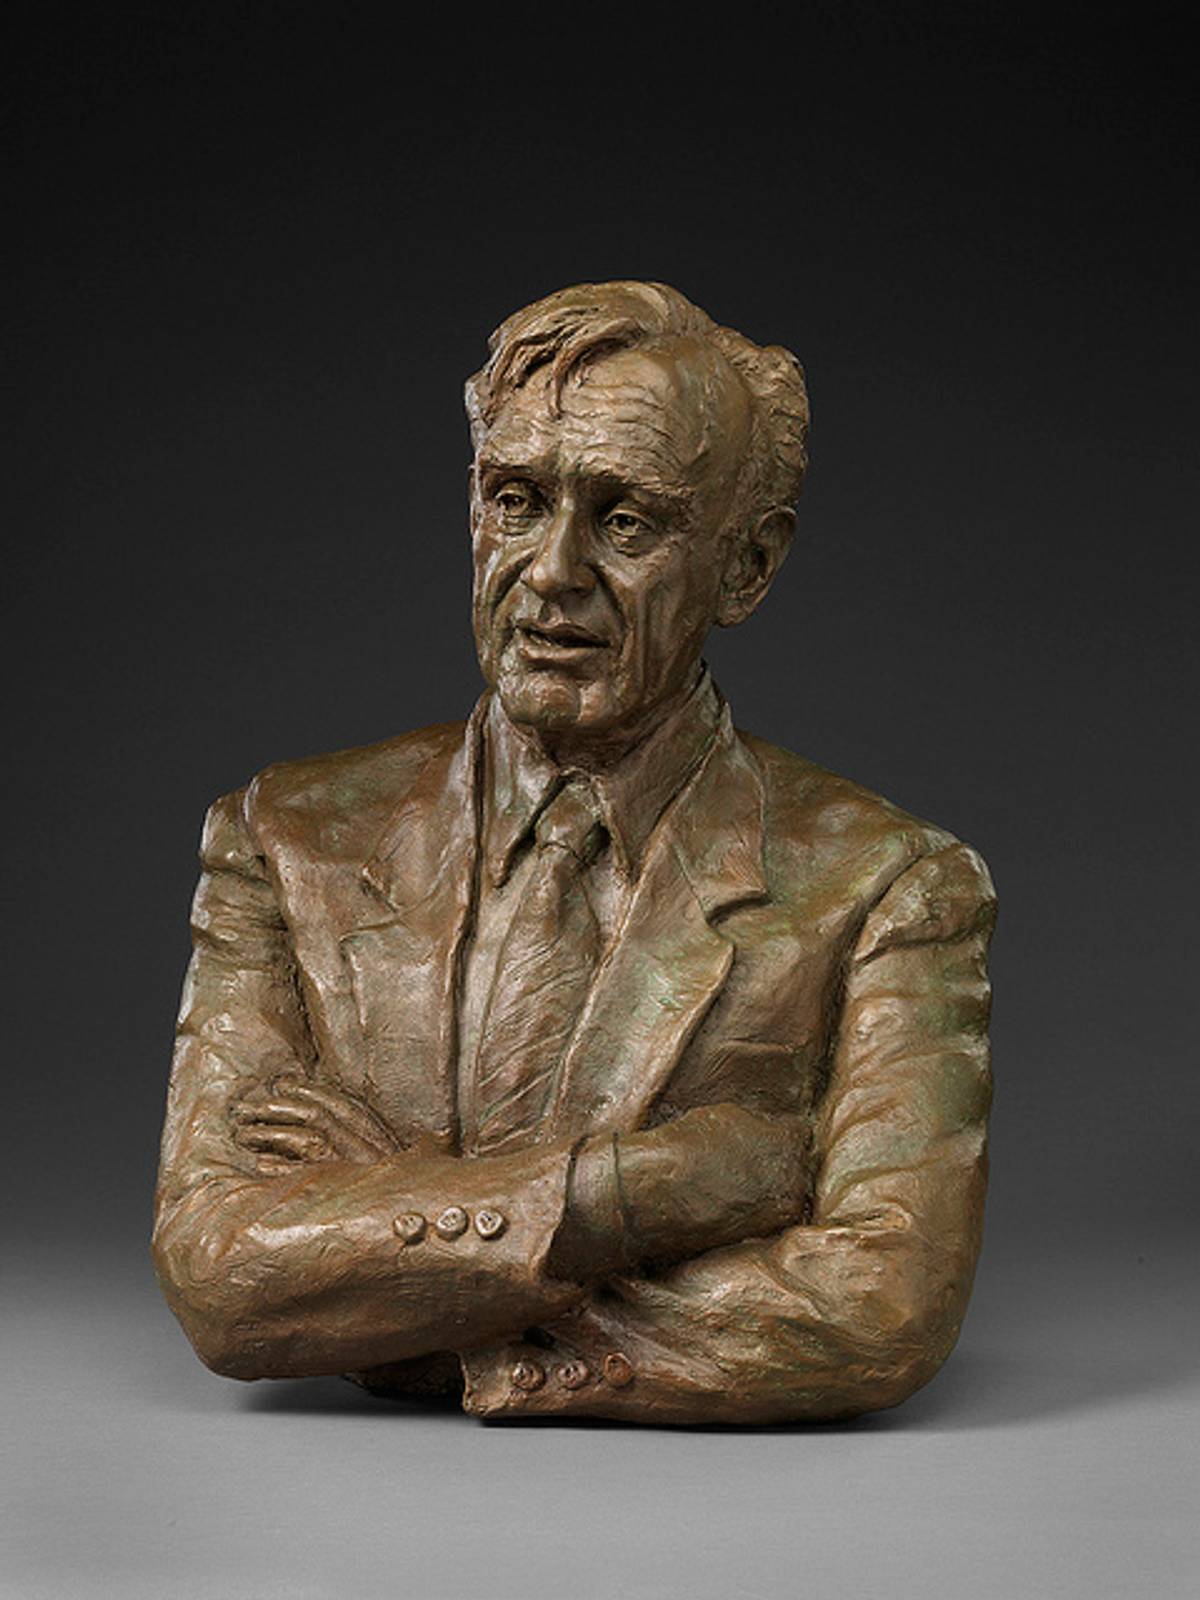 A bronze bust of Wiesel at the National Portrait Gallery, Smithsonian Institution. (Flickr)